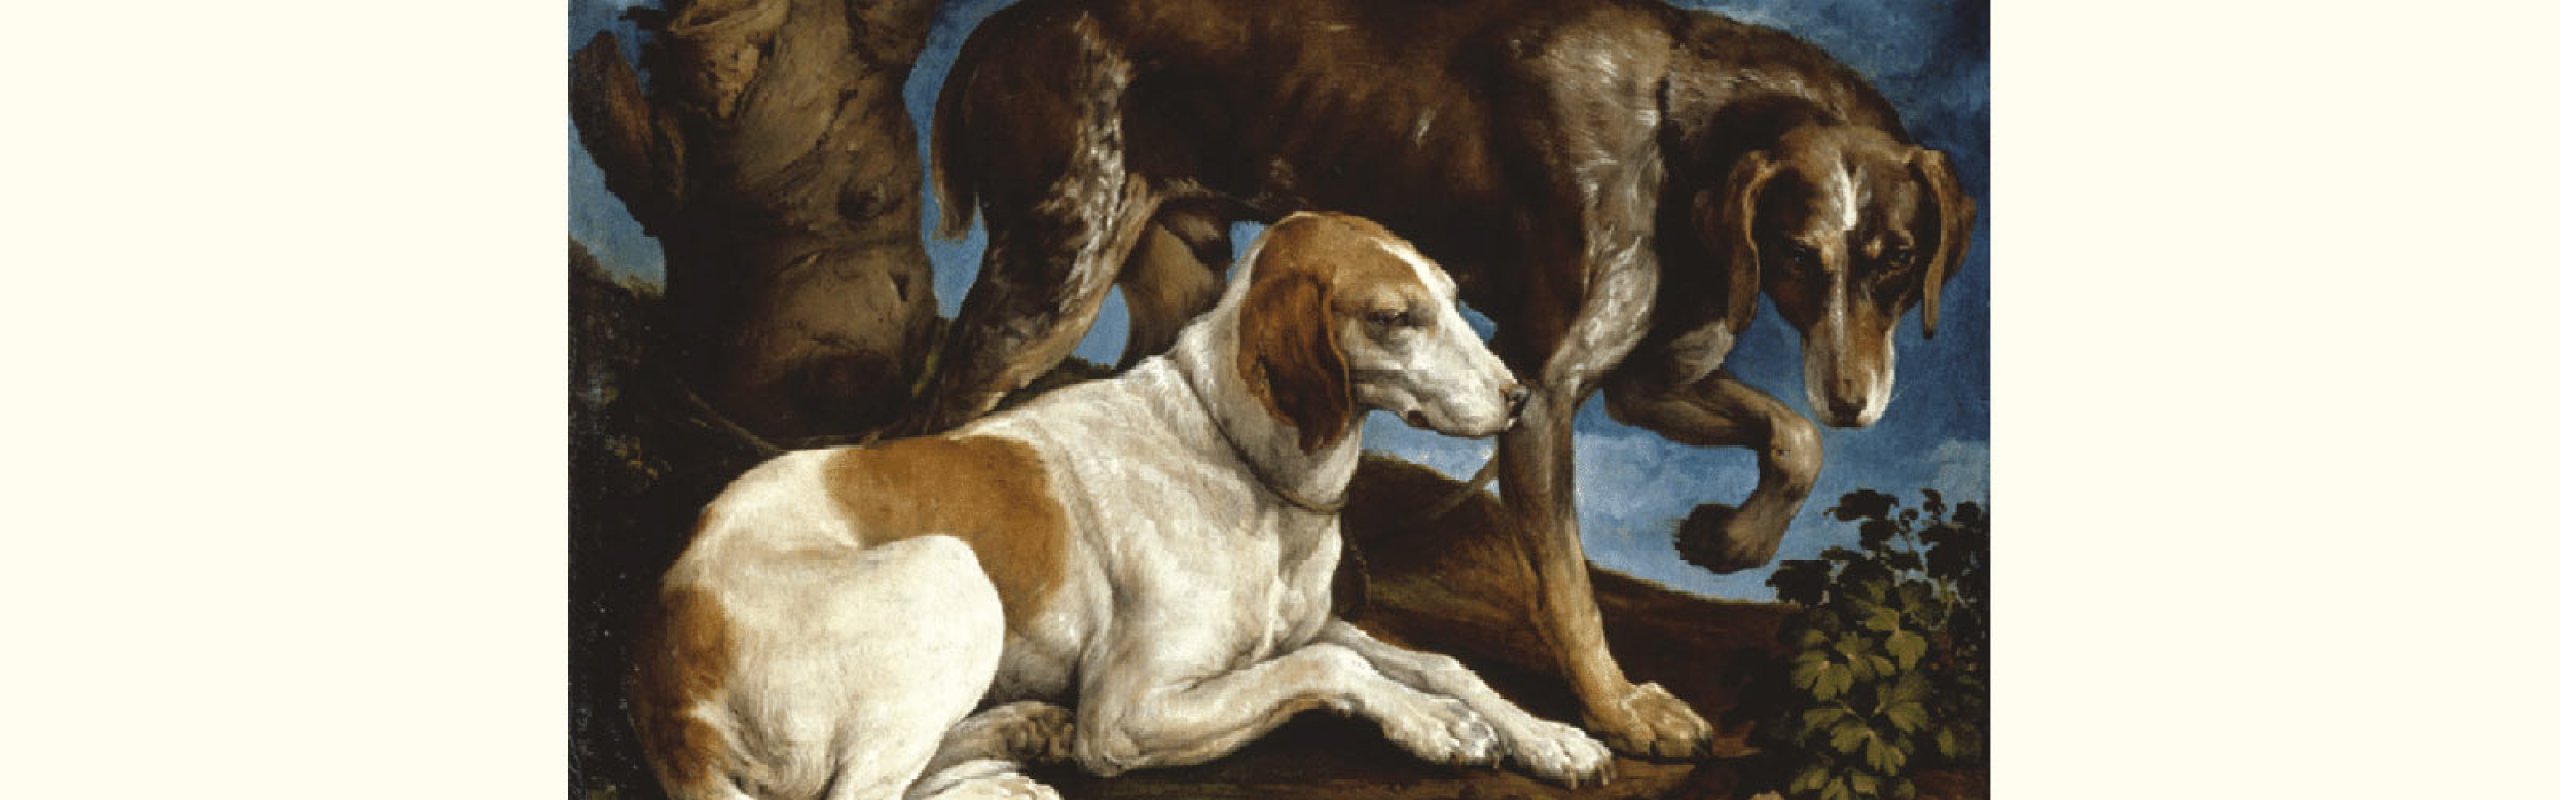 The eyes that look: the secret story of Bassano’s ‘Hunting dogs’